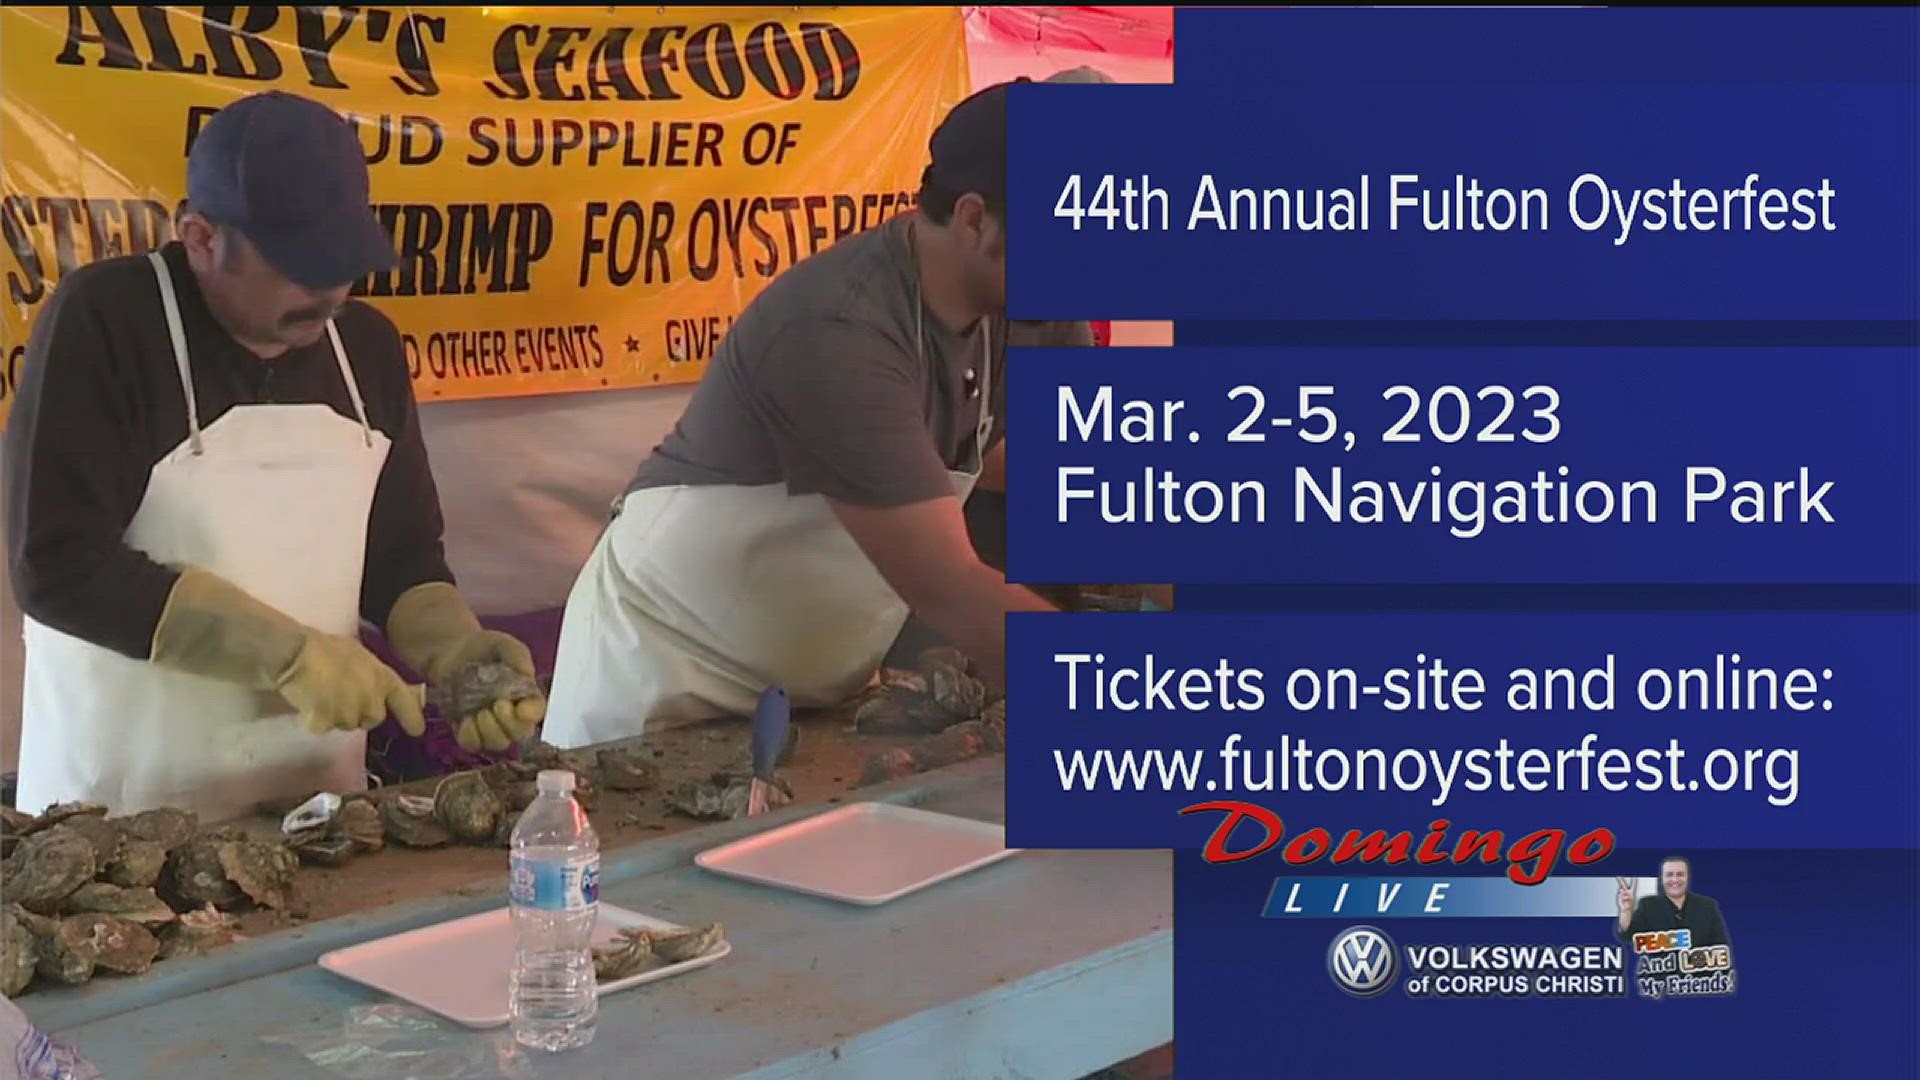 Fulton Oysterfest Committee Vice President Russel Cole joined us live to tell us about what to expect at this year's Oysterfest.